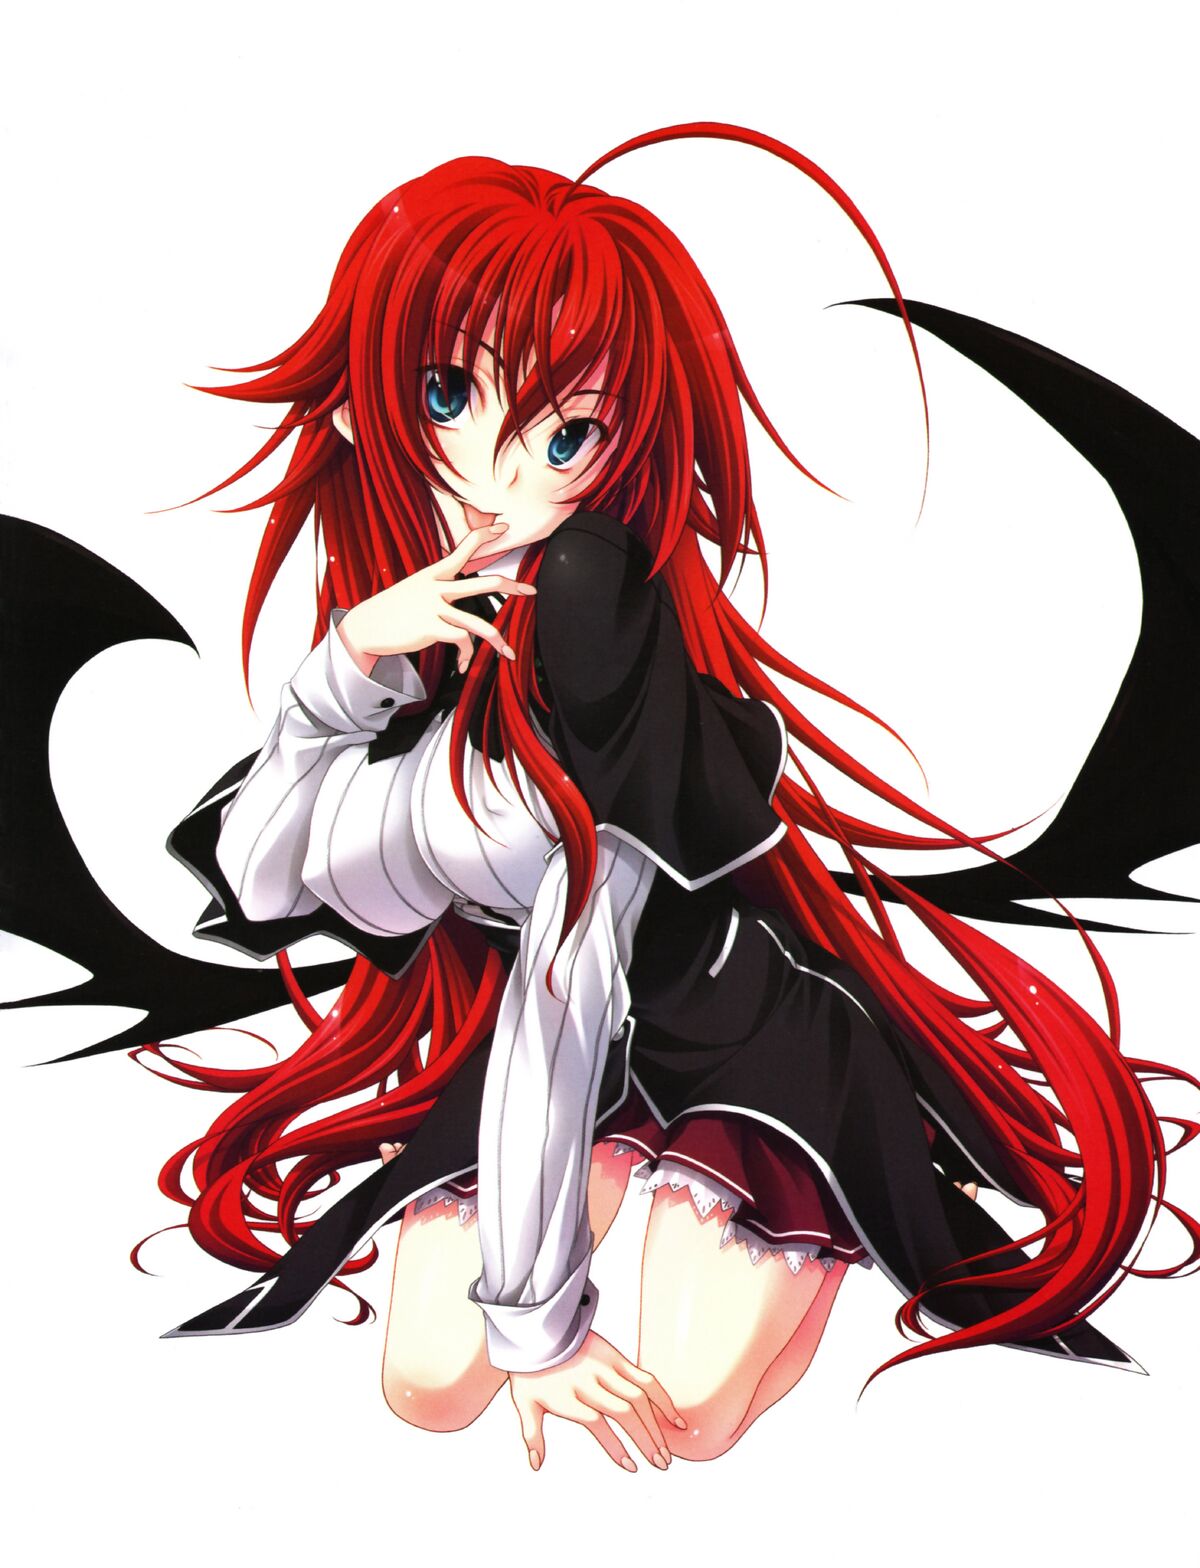 Who is your least favorite girl in High School DxD, if any (for me